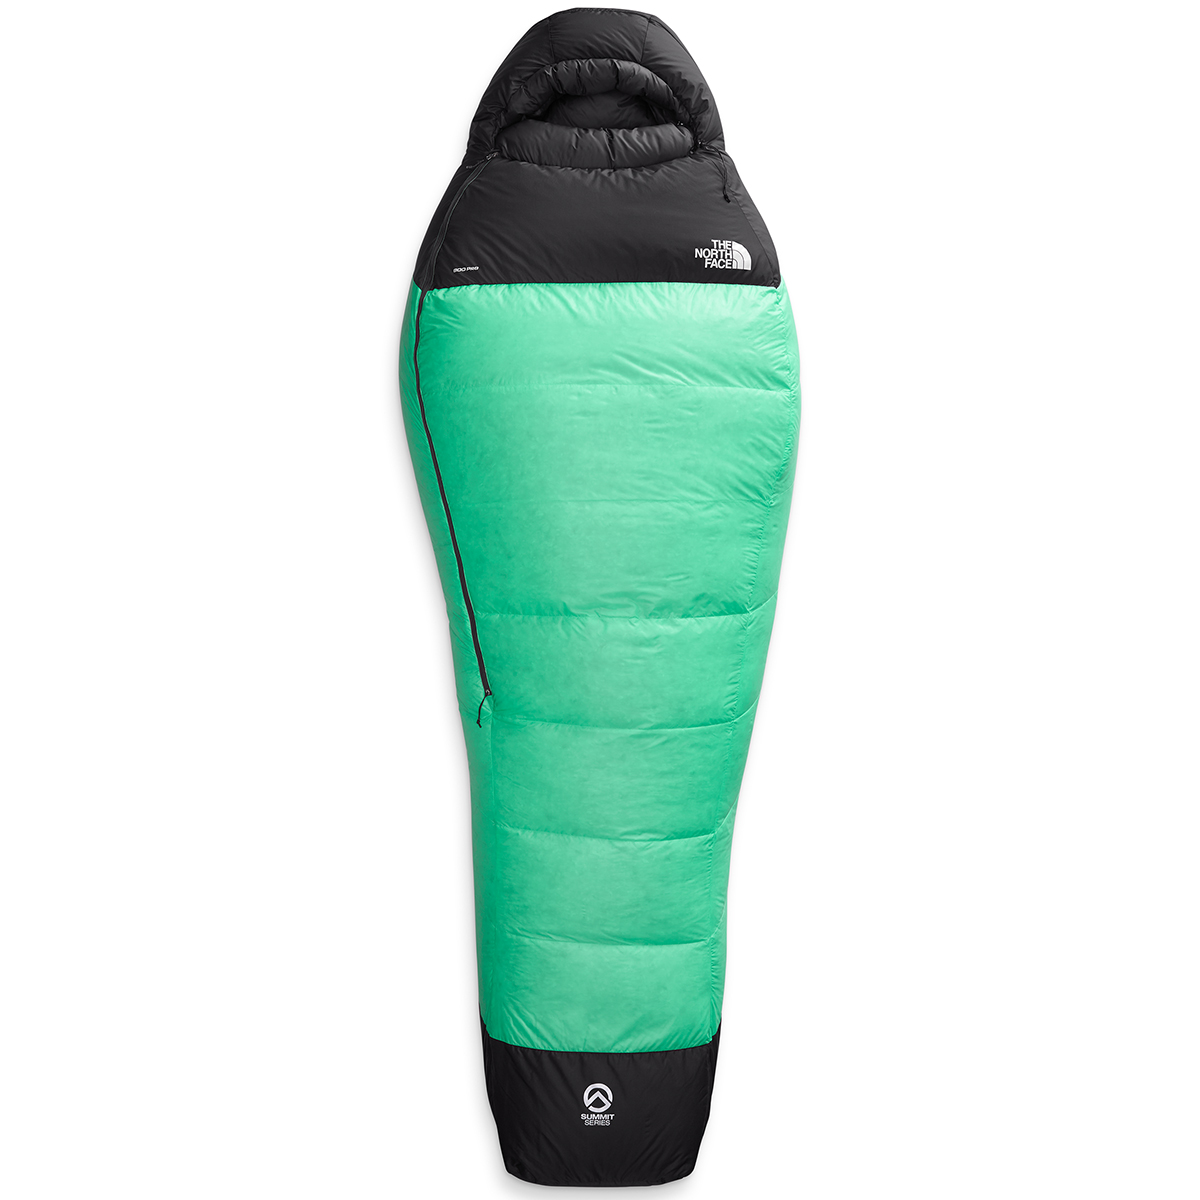 THE NORTH FACE Inferno 0 Degree/-18C Sleeping Bag - Eastern Mountain Sports